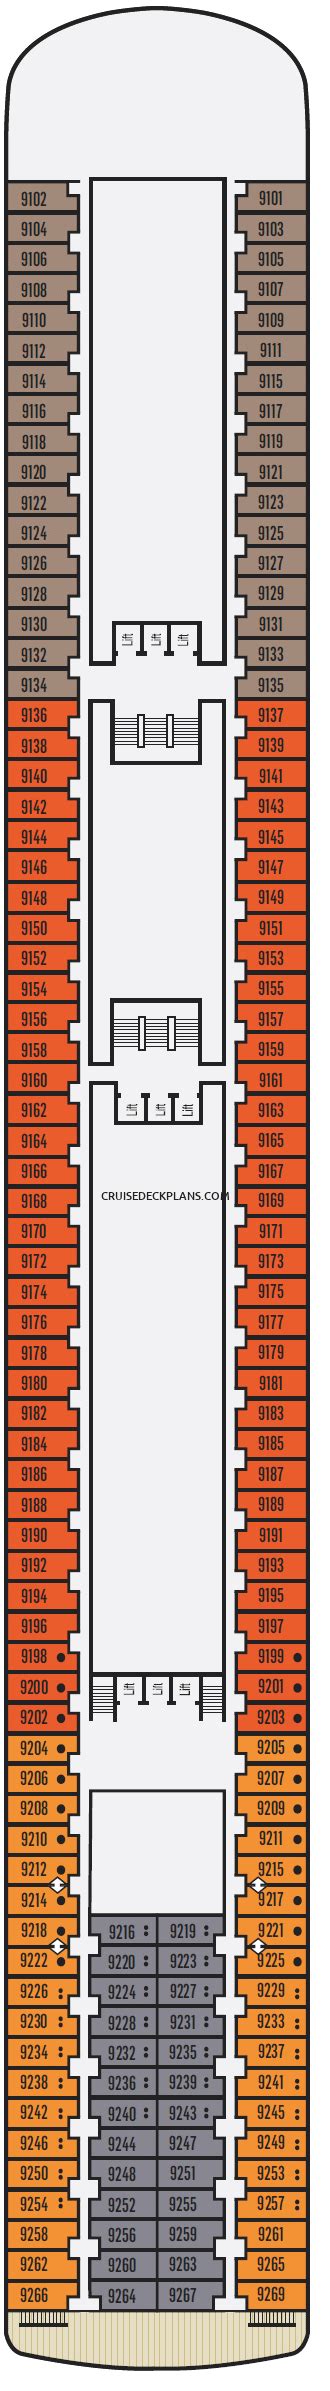 Pacific Jewel Deck Plans Layouts Pictures Videos